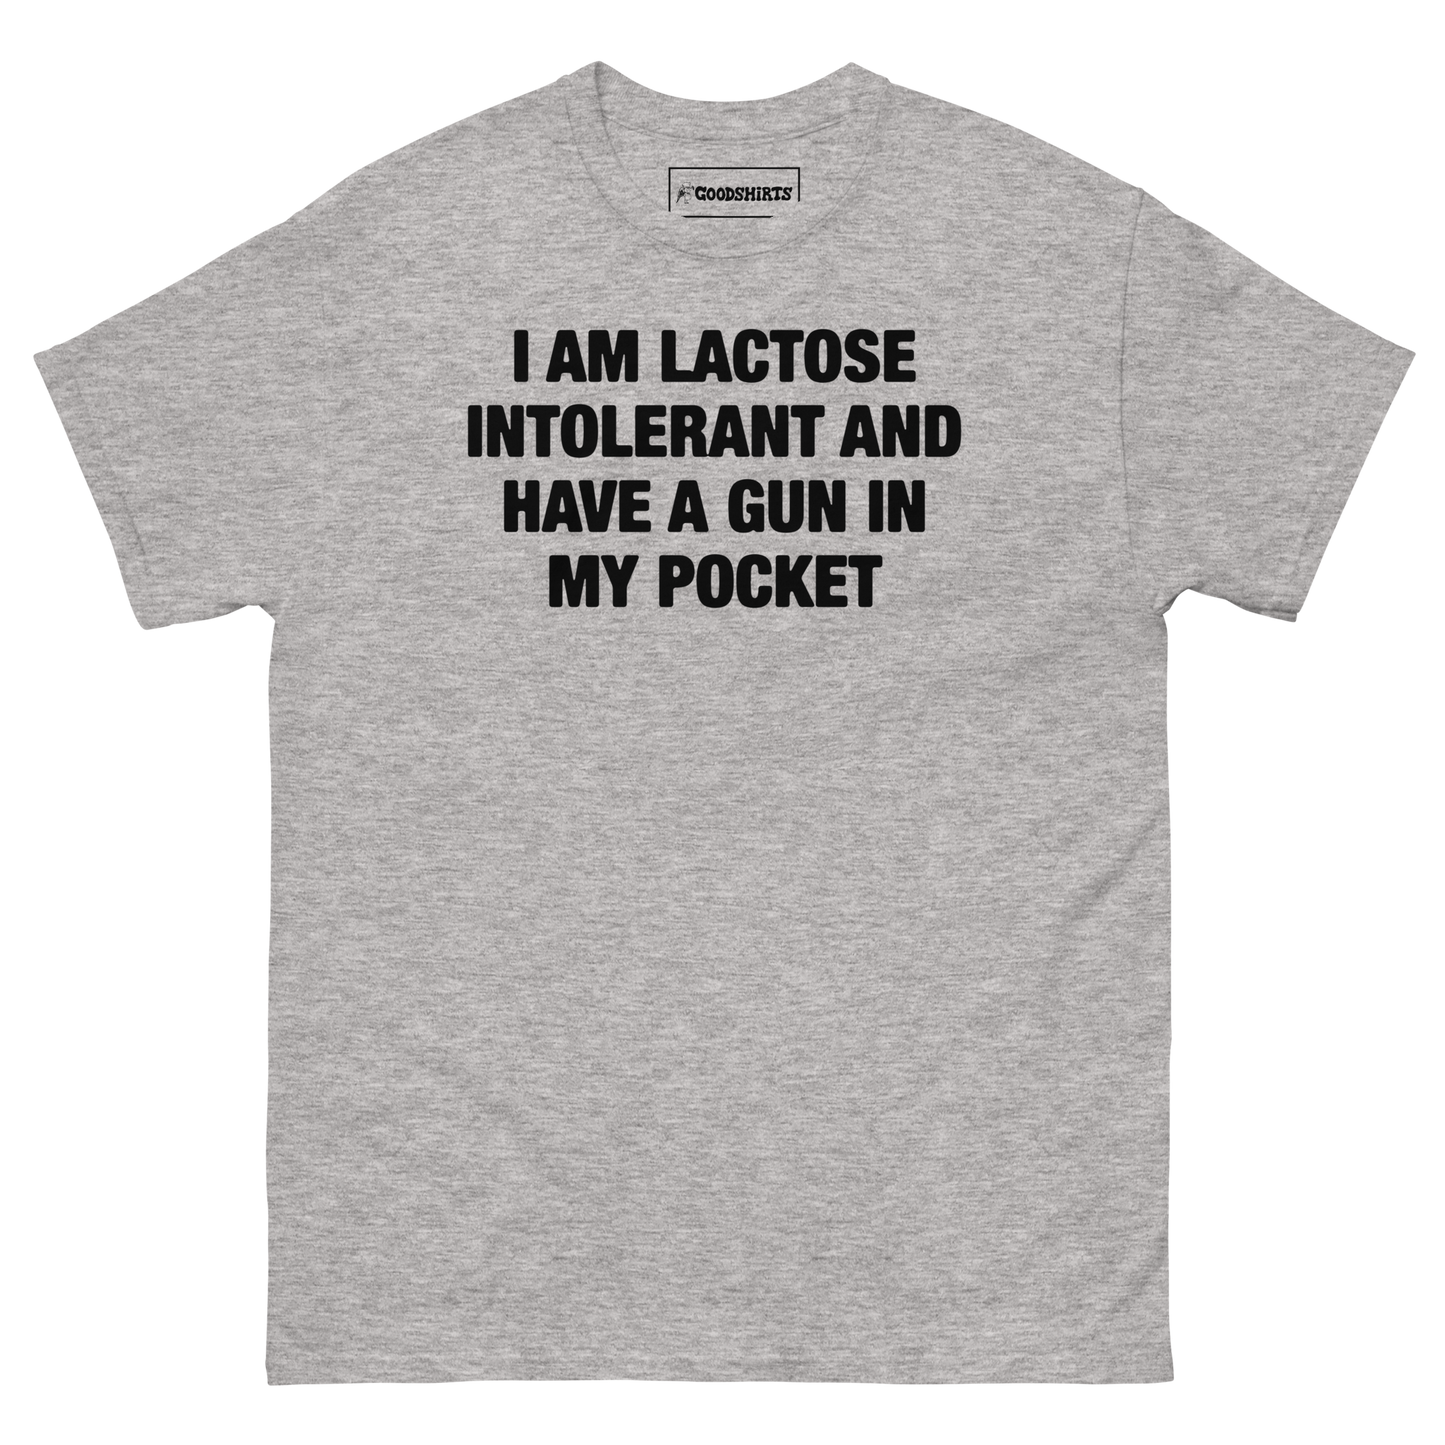 I Am Lactose Intolerant And Have A Gun In My Pocket.